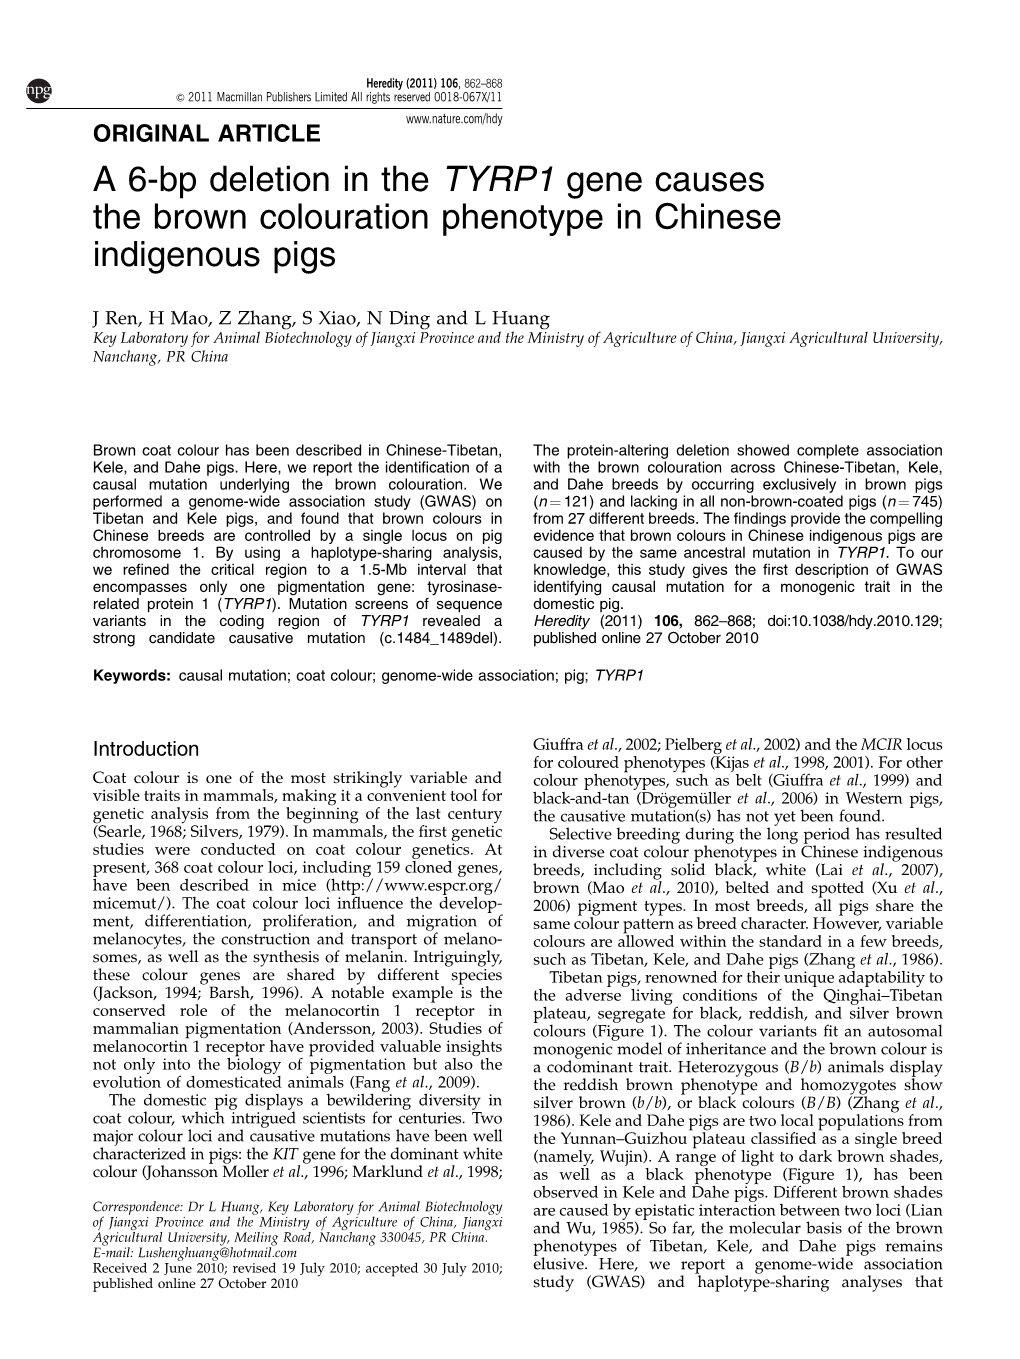 A 6-Bp Deletion in the TYRP1 Gene Causes the Brown Colouration Phenotype in Chinese Indigenous Pigs